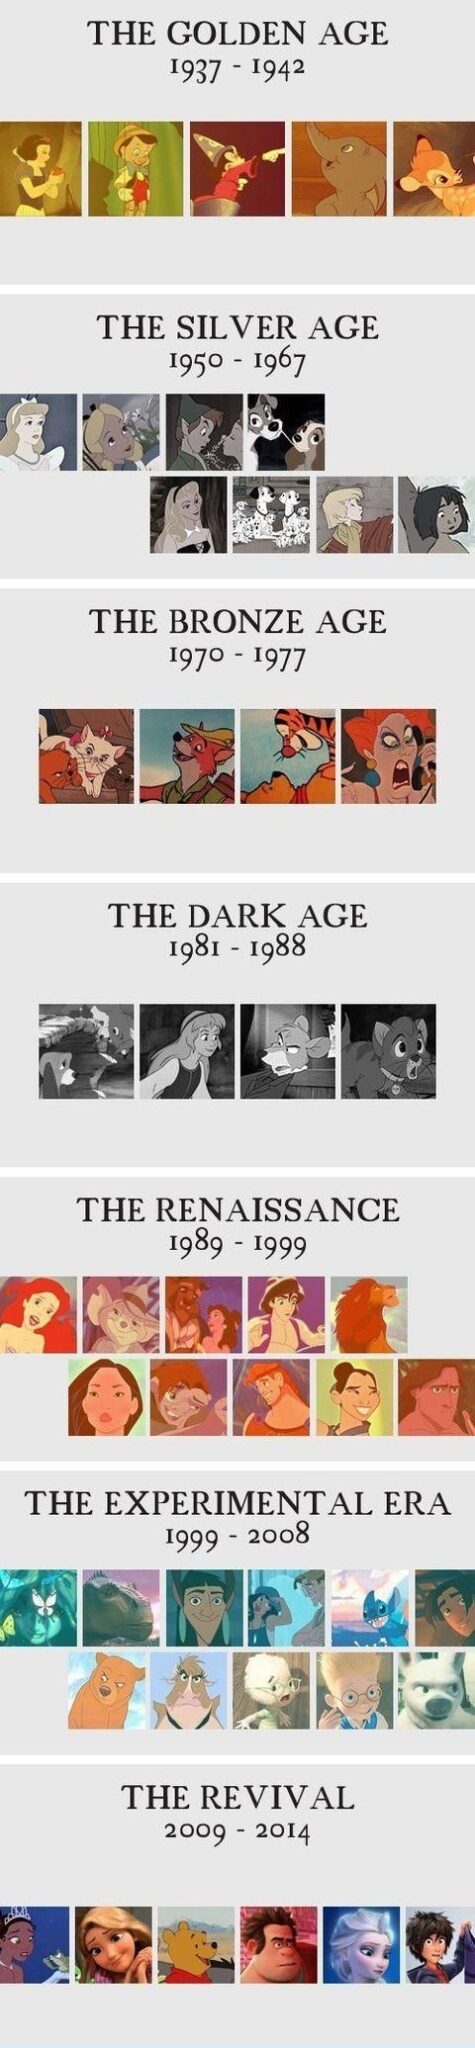 ages of disney - The Golden Age 1937 1942 The Silver Age 1950 1967 Co The Bronze Age 1970 1977 The Dark Age 1981 1988 The Renaissance 1989 1999 The Experimental Era 1999 2008 The Revival 2009 2014